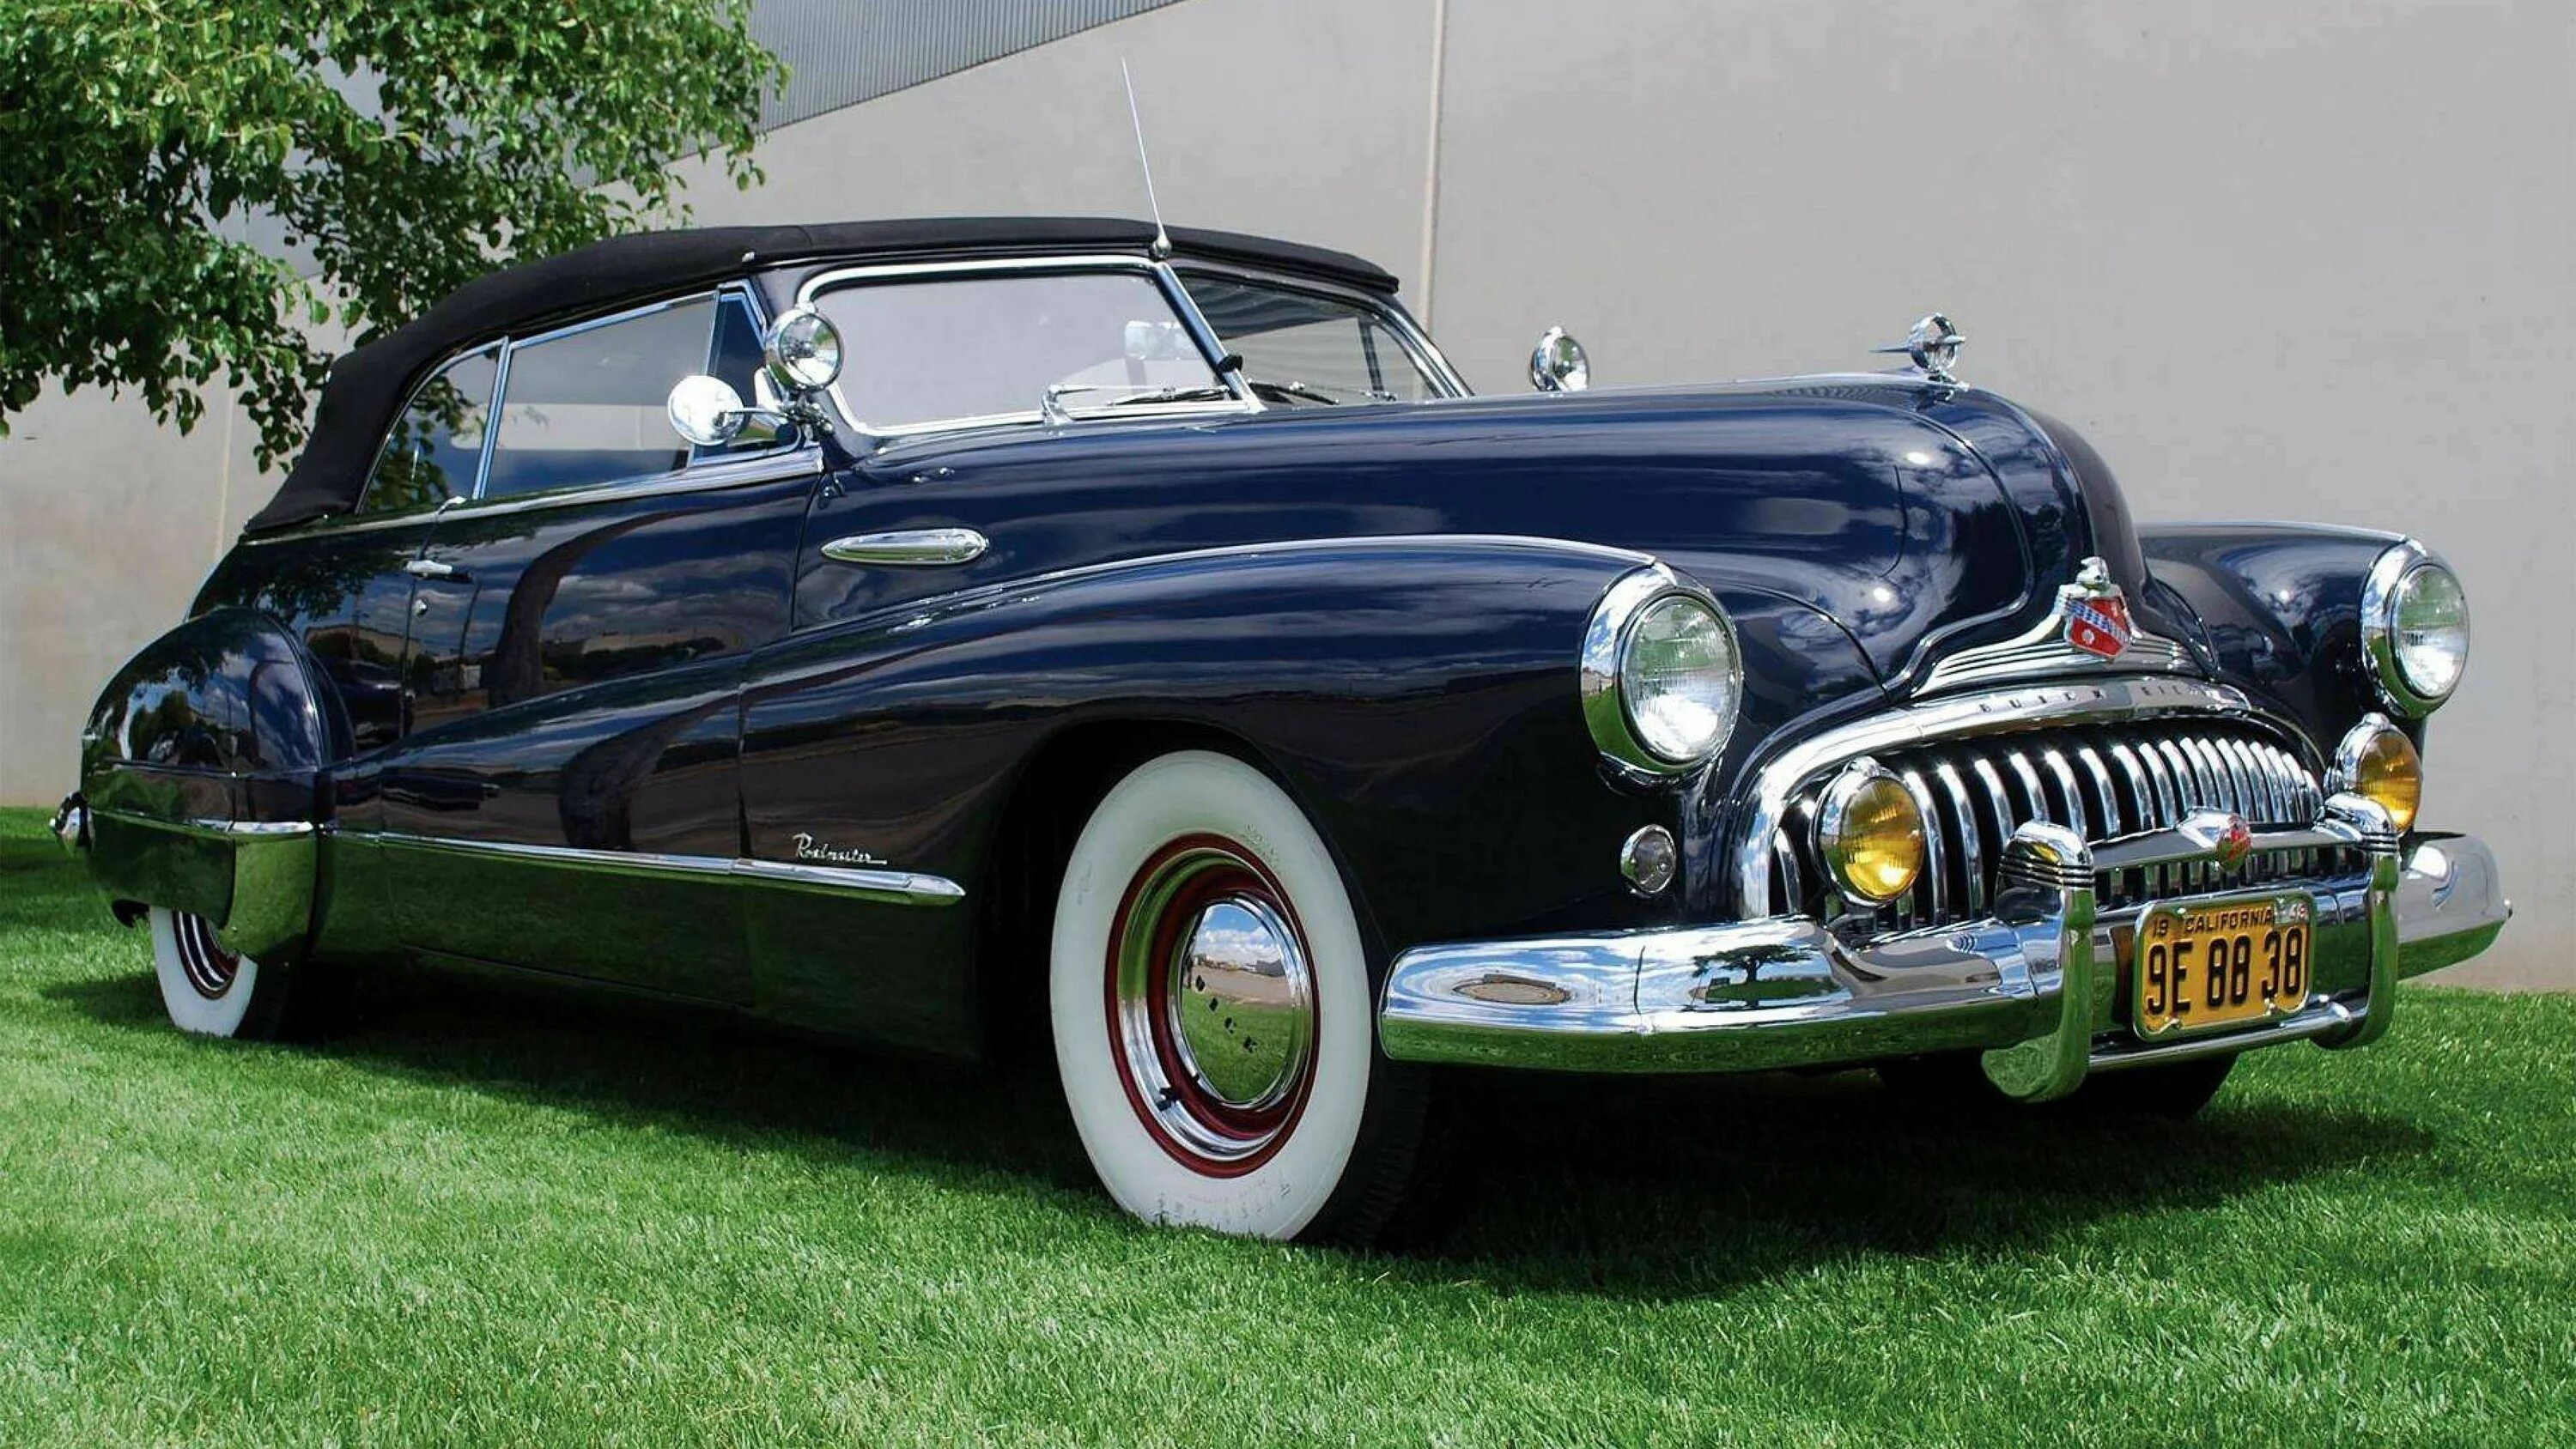 Best old cars. Buick Roadmaster 1949. Buick Roadmaster 1959. Buick Roadmaster Convertible 1949. Buick Roadmaster 1958.